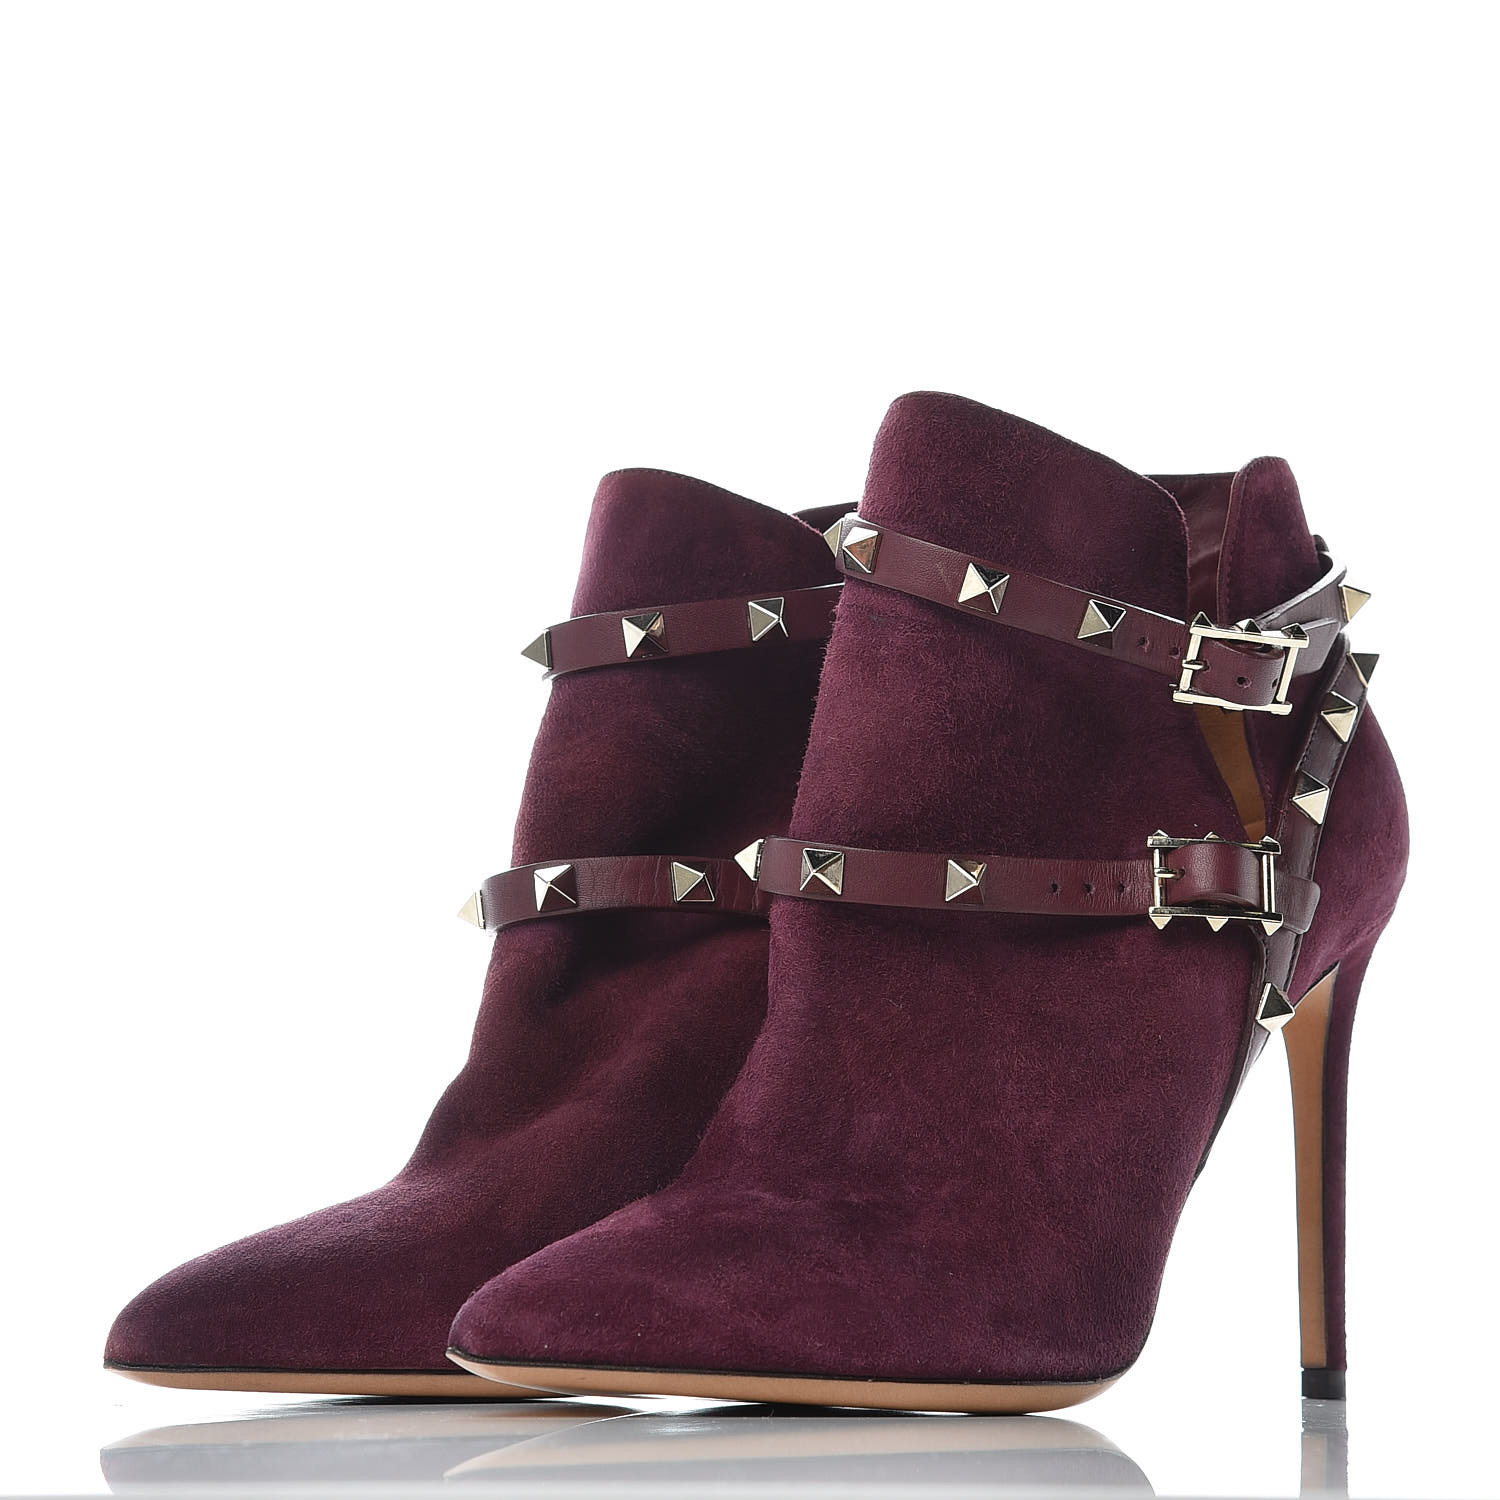 VALENTINO Suede Rockstud Ankle Booties 37.5 Burgundy 414018 | FASHIONPHILE